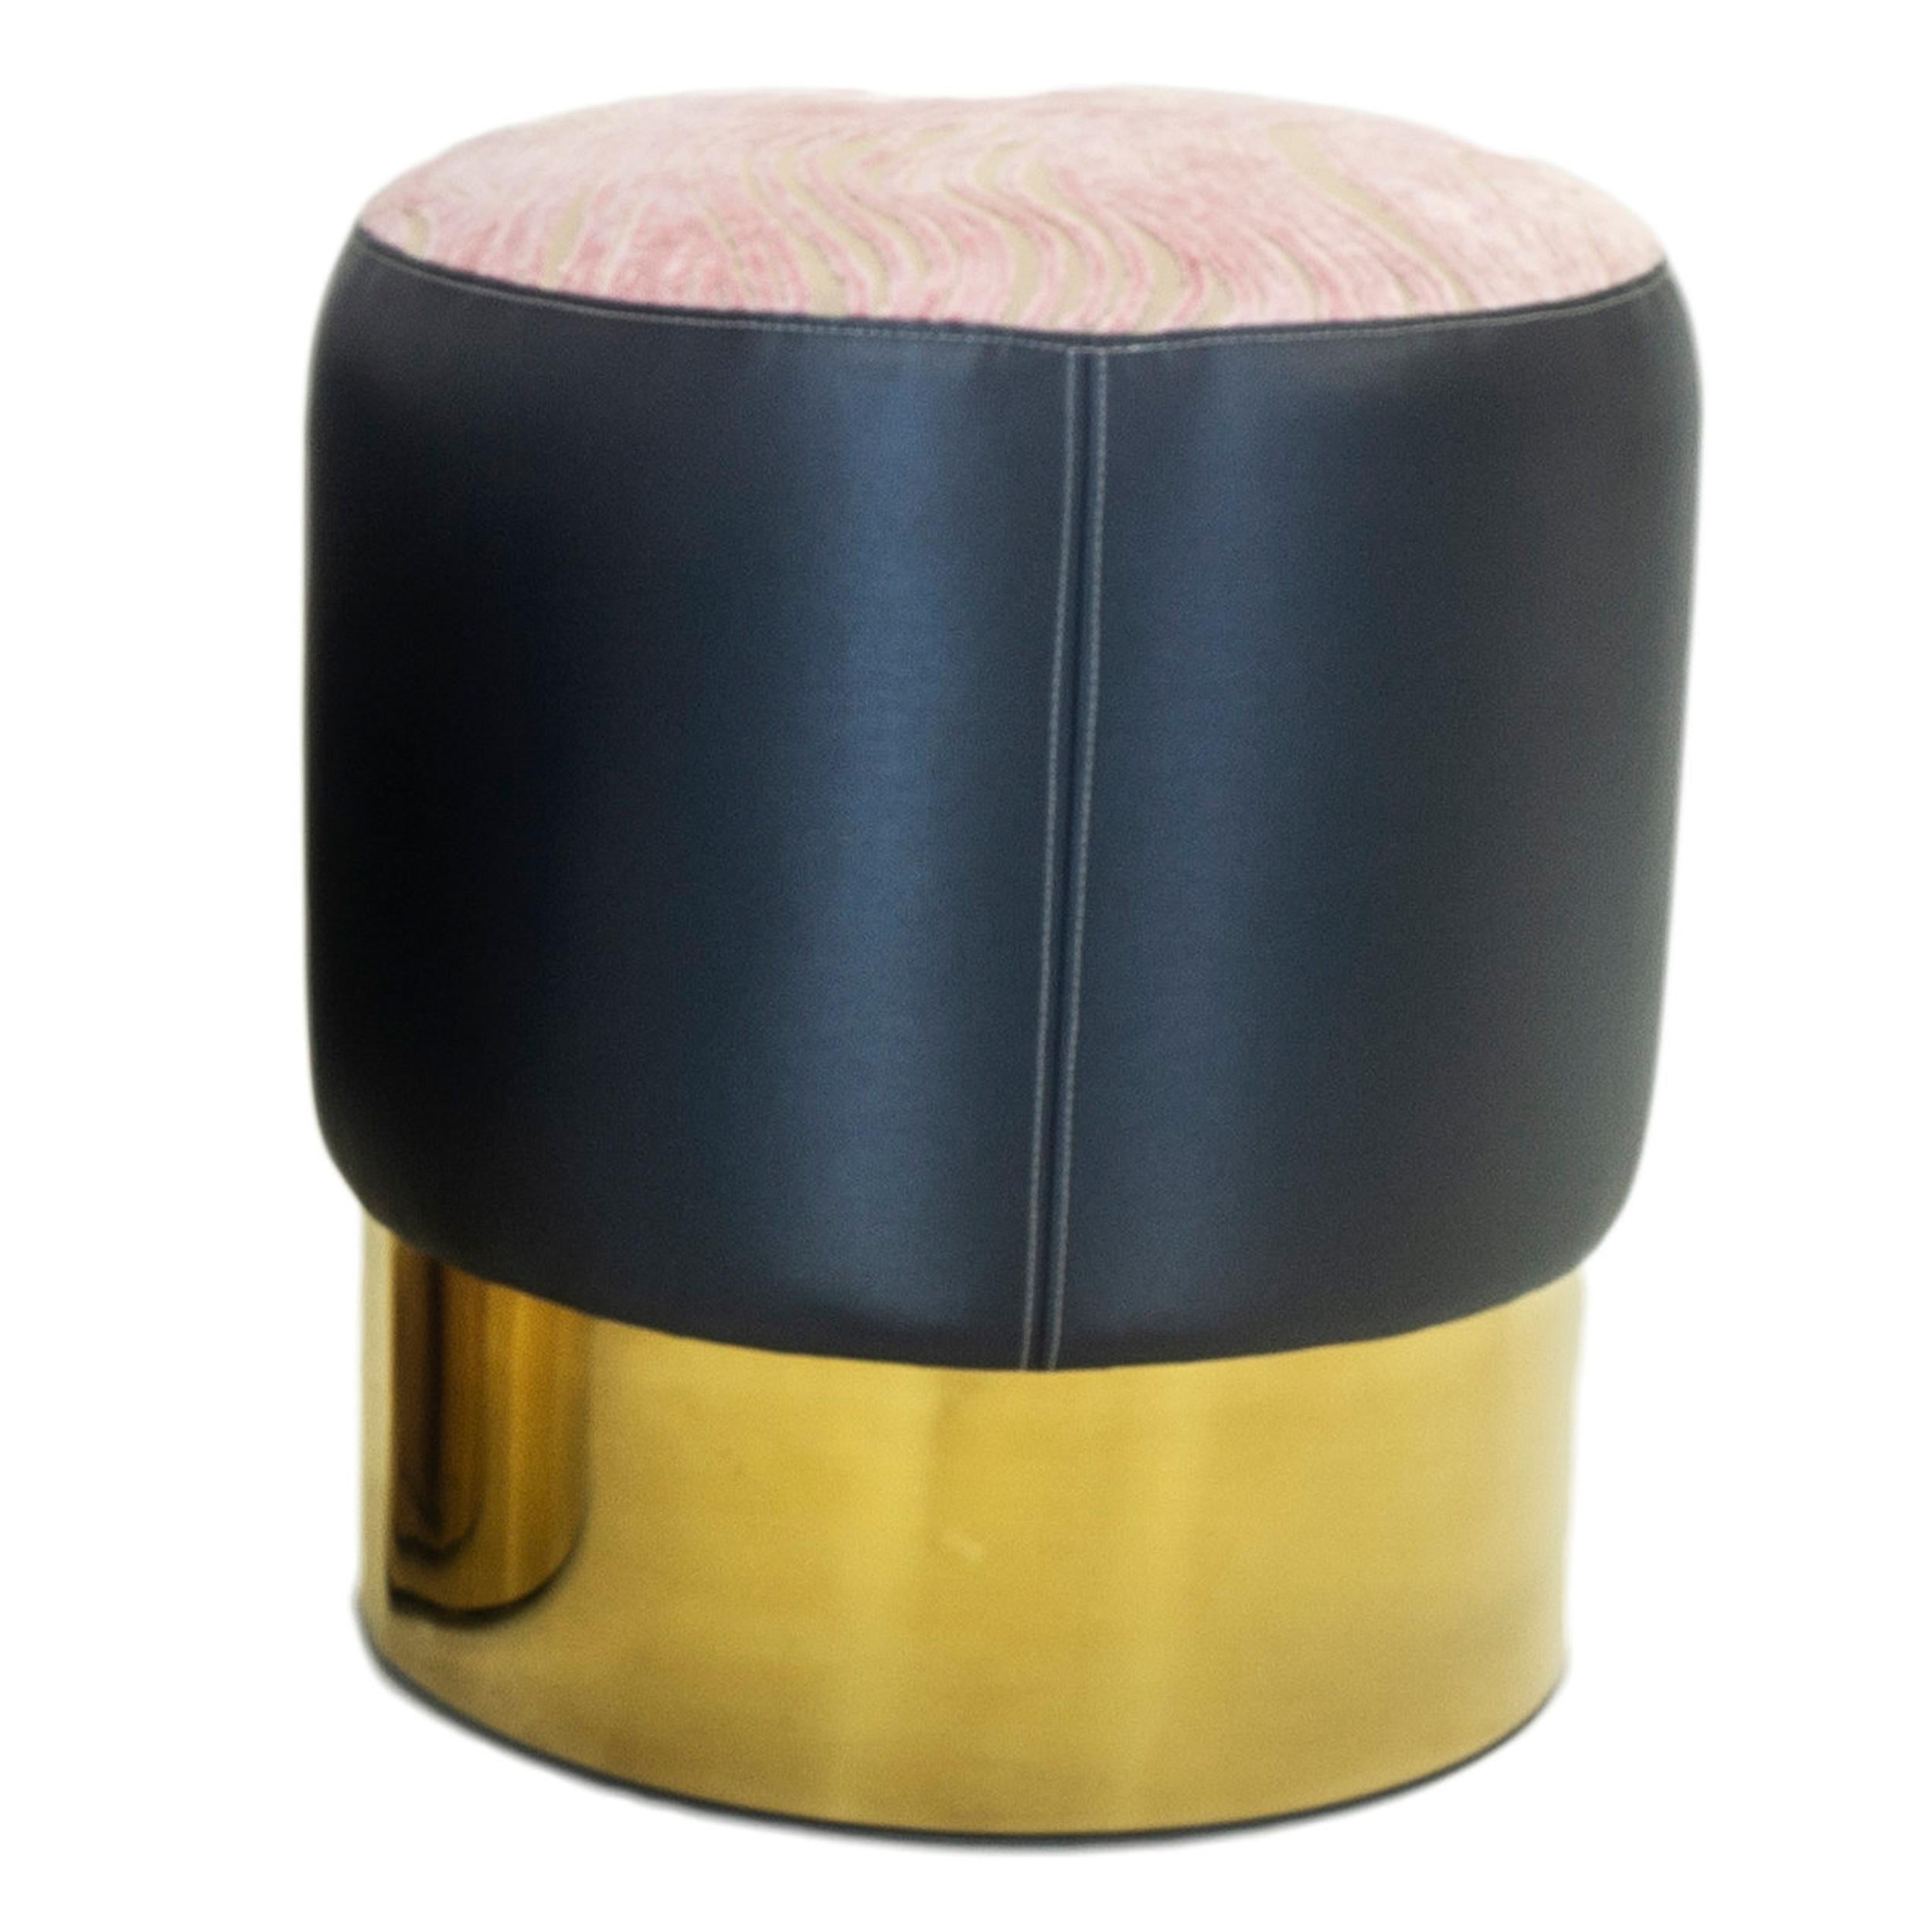 Our small round ottoman is the perfect finishing accent that can be used as extra seating. Featuring a round gold finished base, it is upholstered in a navy blue vinyl with pink cut velvet in a swirling pattern on top. Ask if any currently